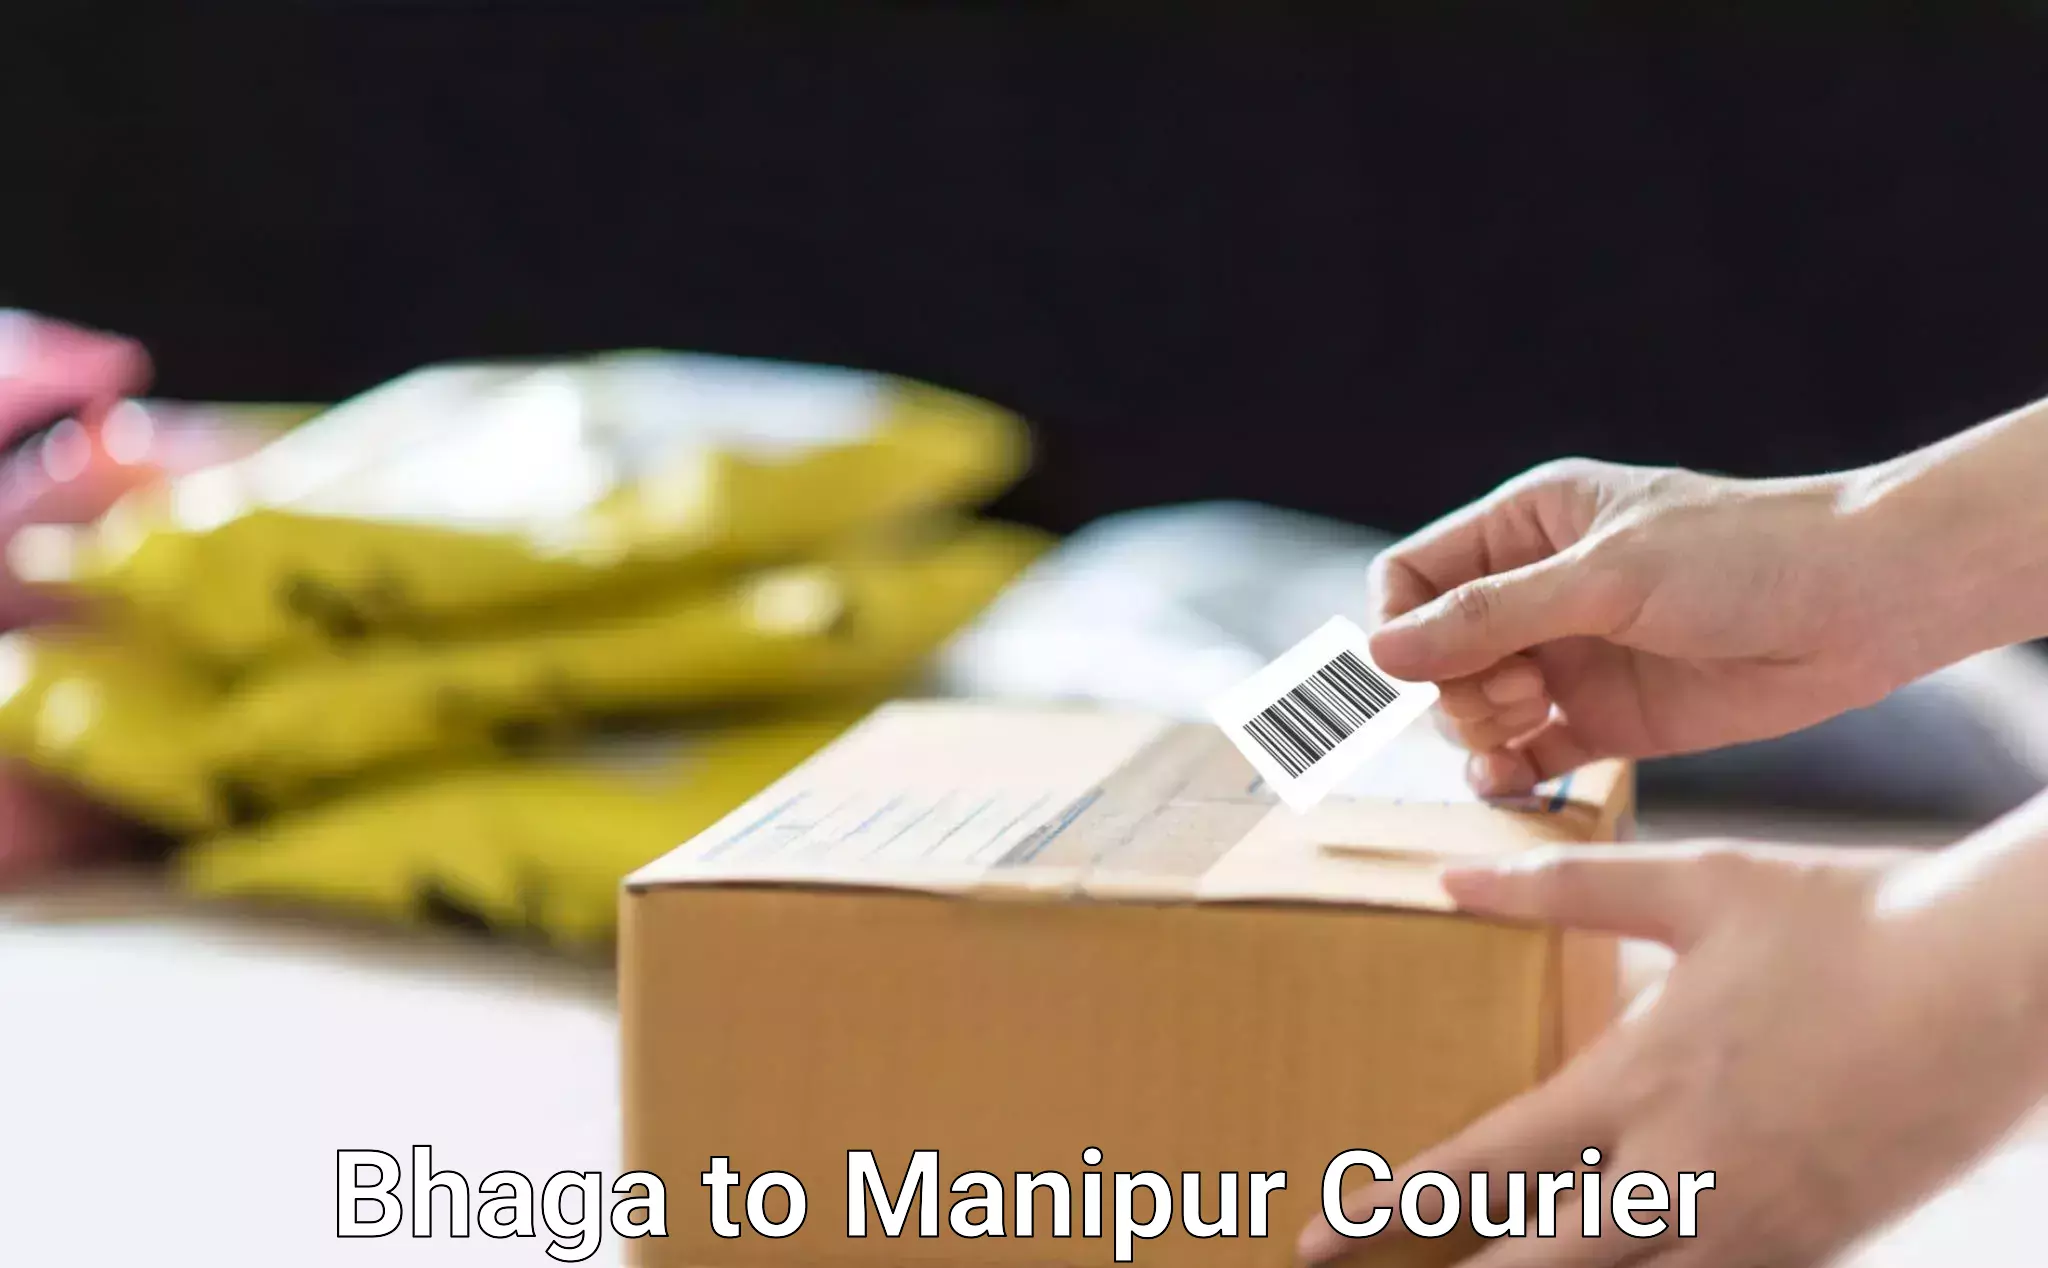 Courier rate comparison Bhaga to Moirang